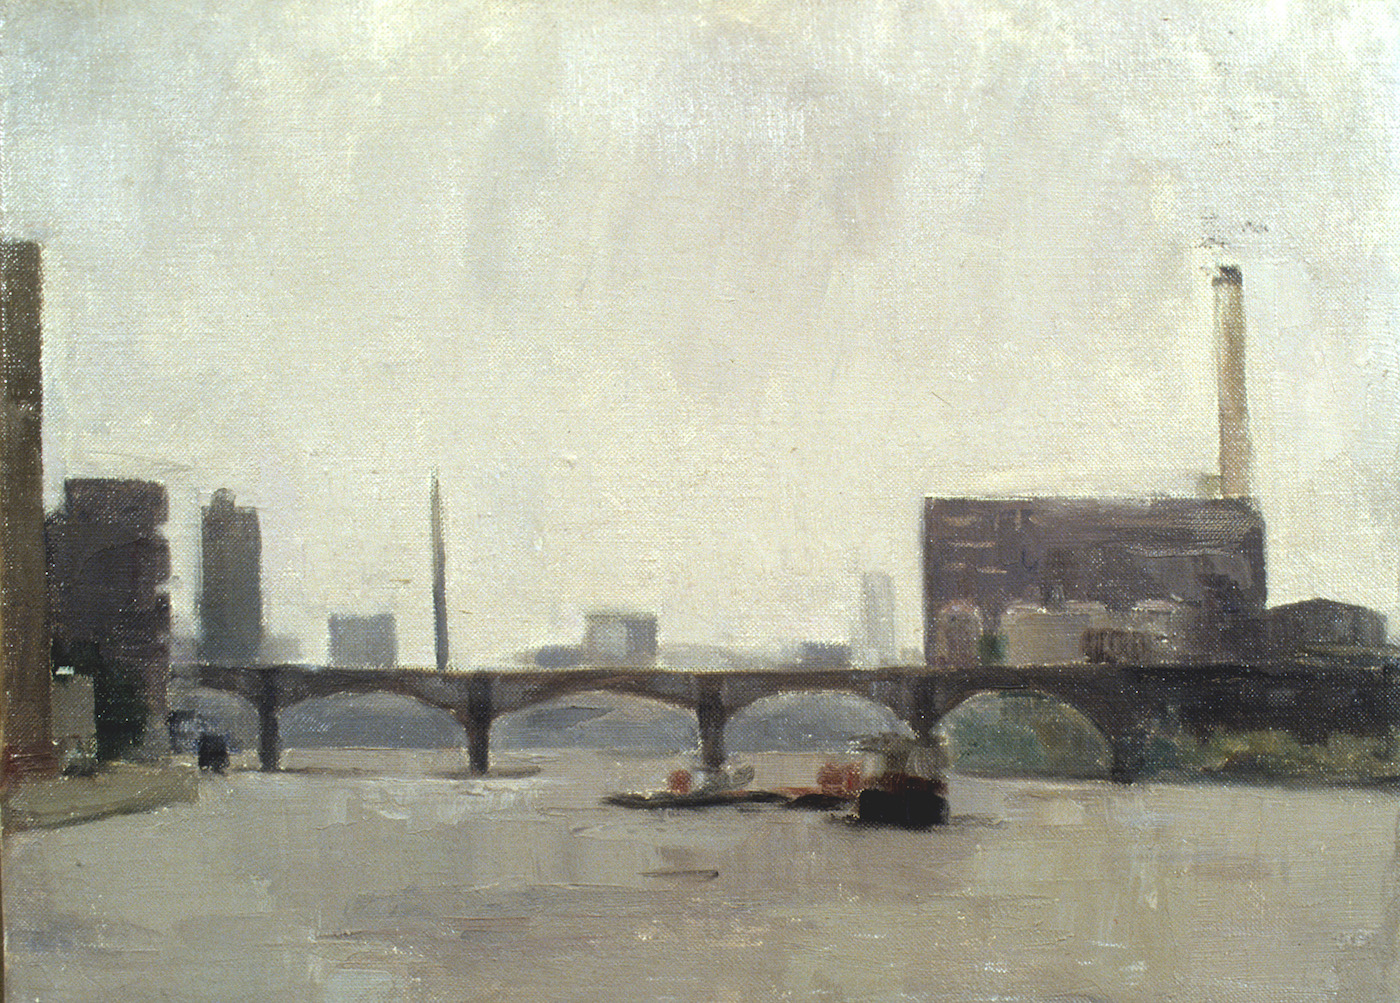 Fulham Power Station, 12 x 16 inches, oil on linen, 1983.